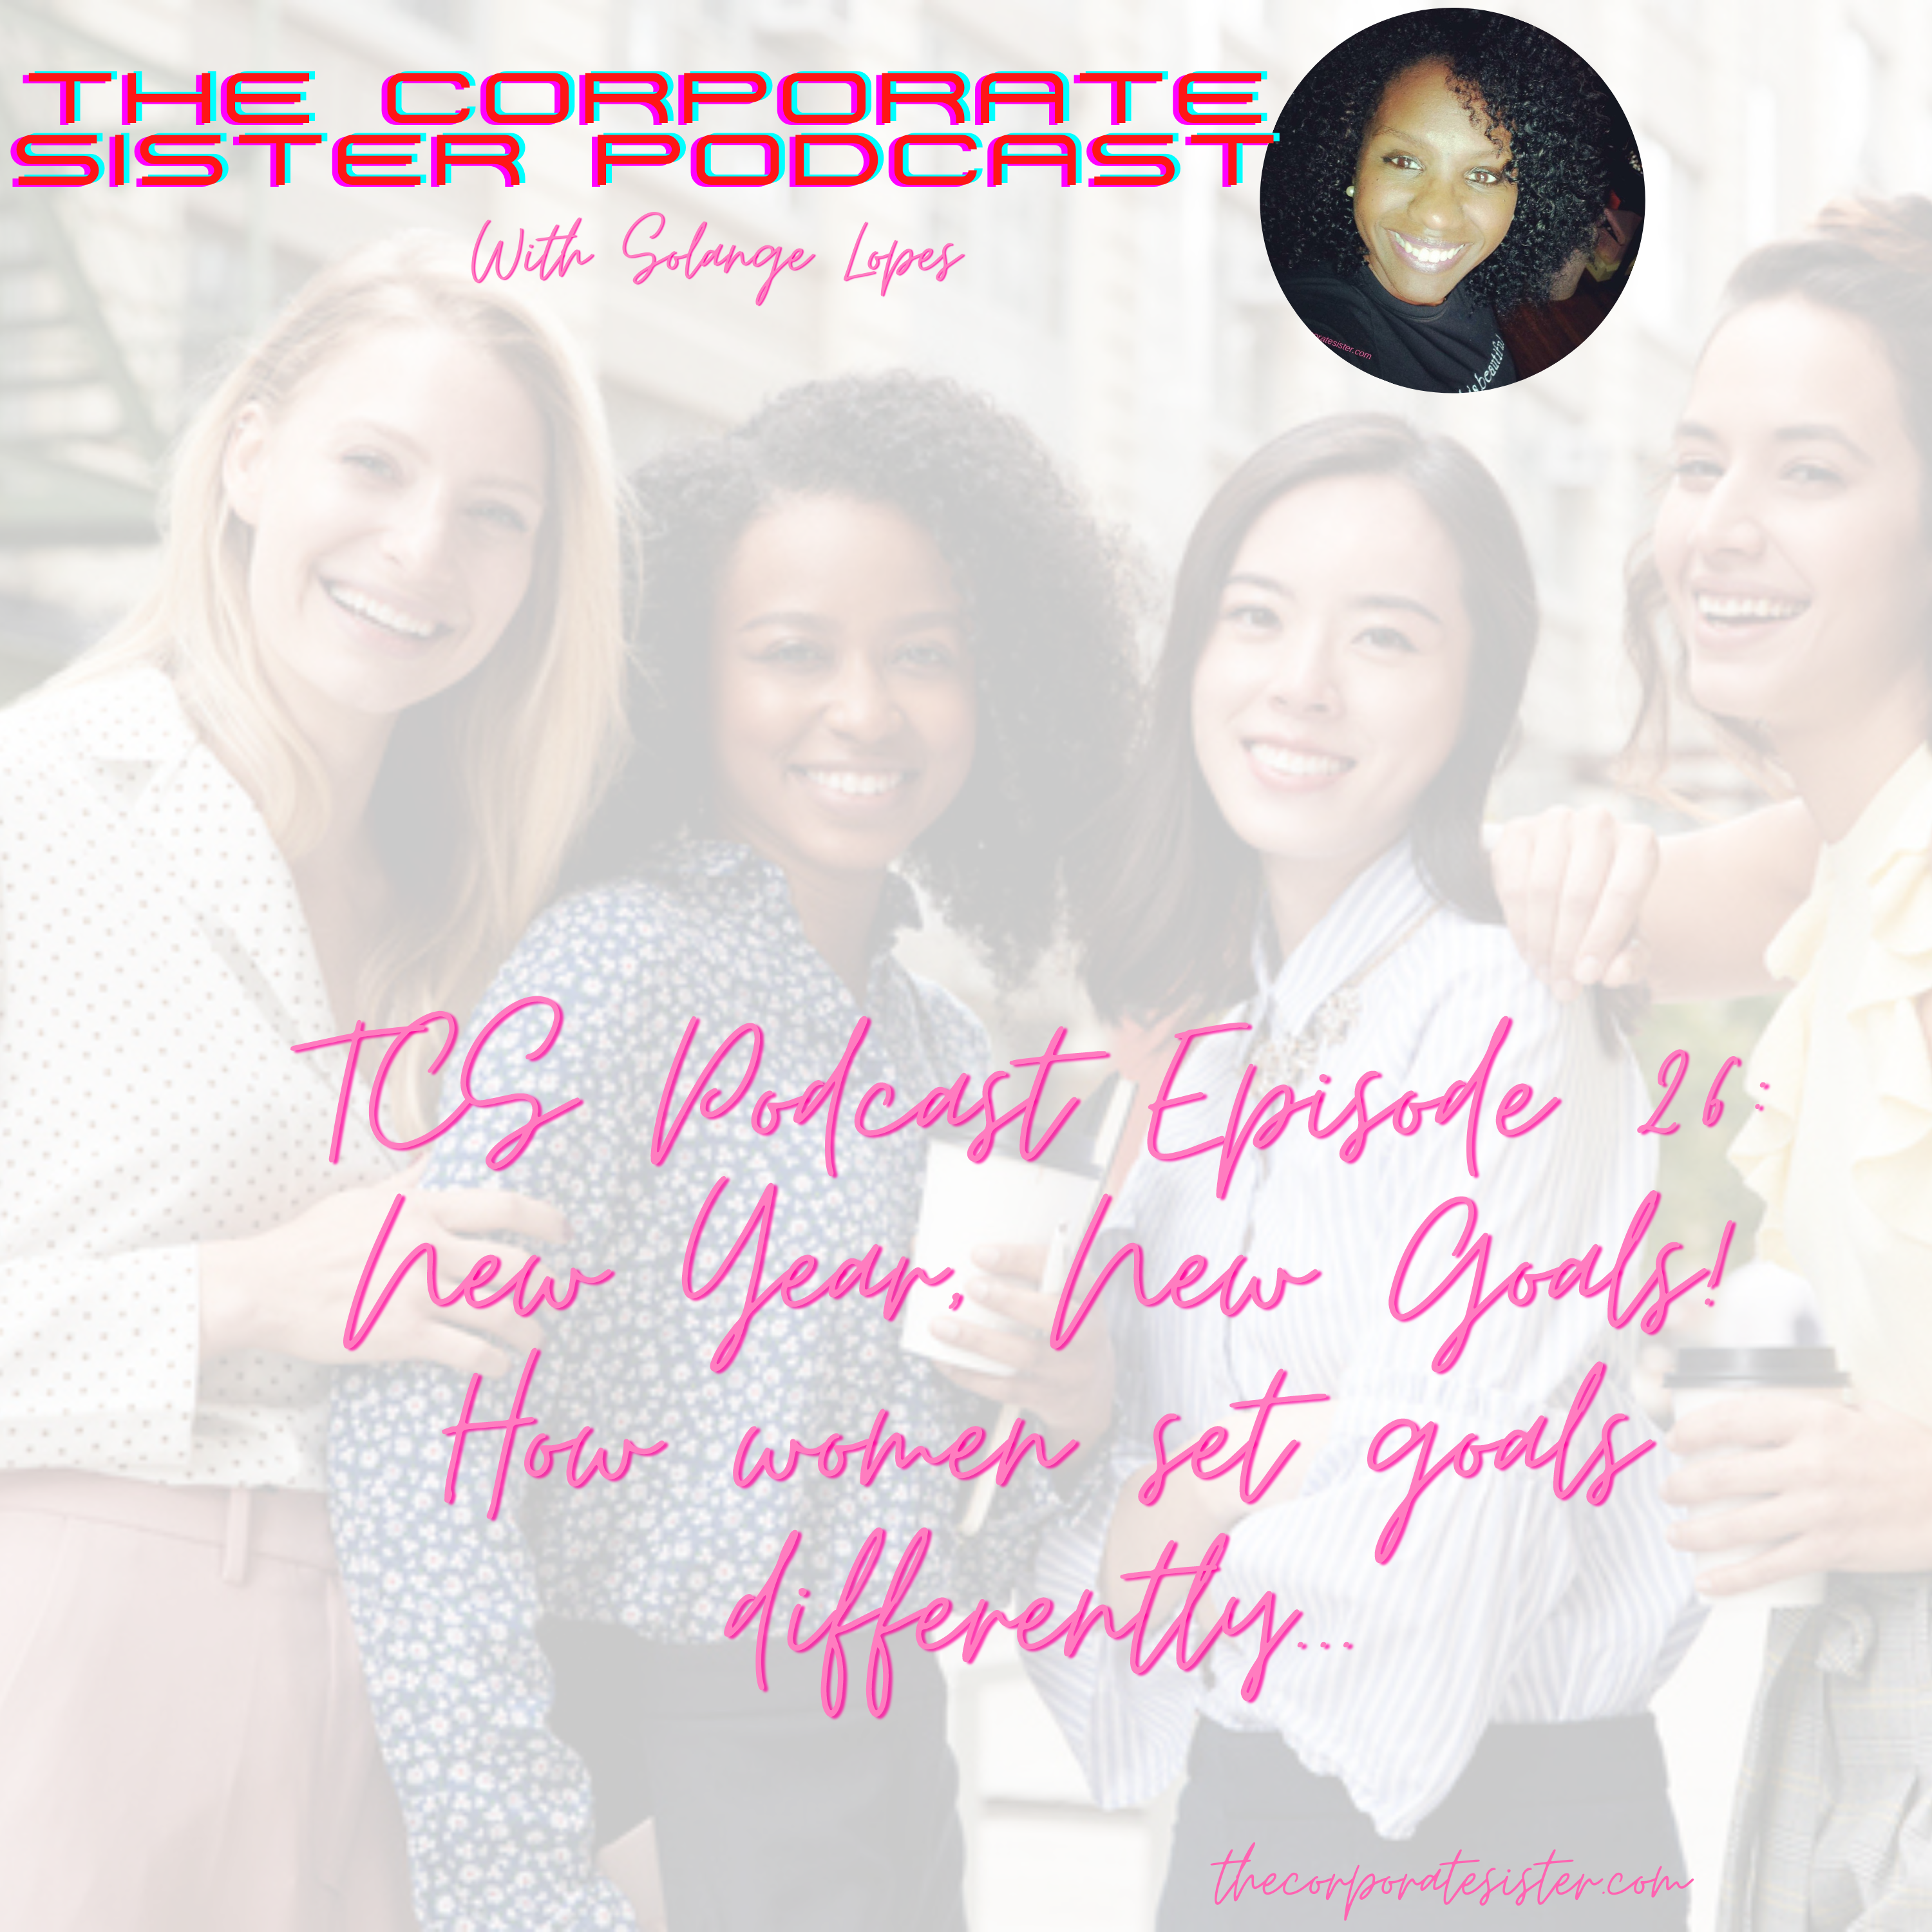 TCS Podcast Episode 26: New Year, New Goals! How women set goals differently…